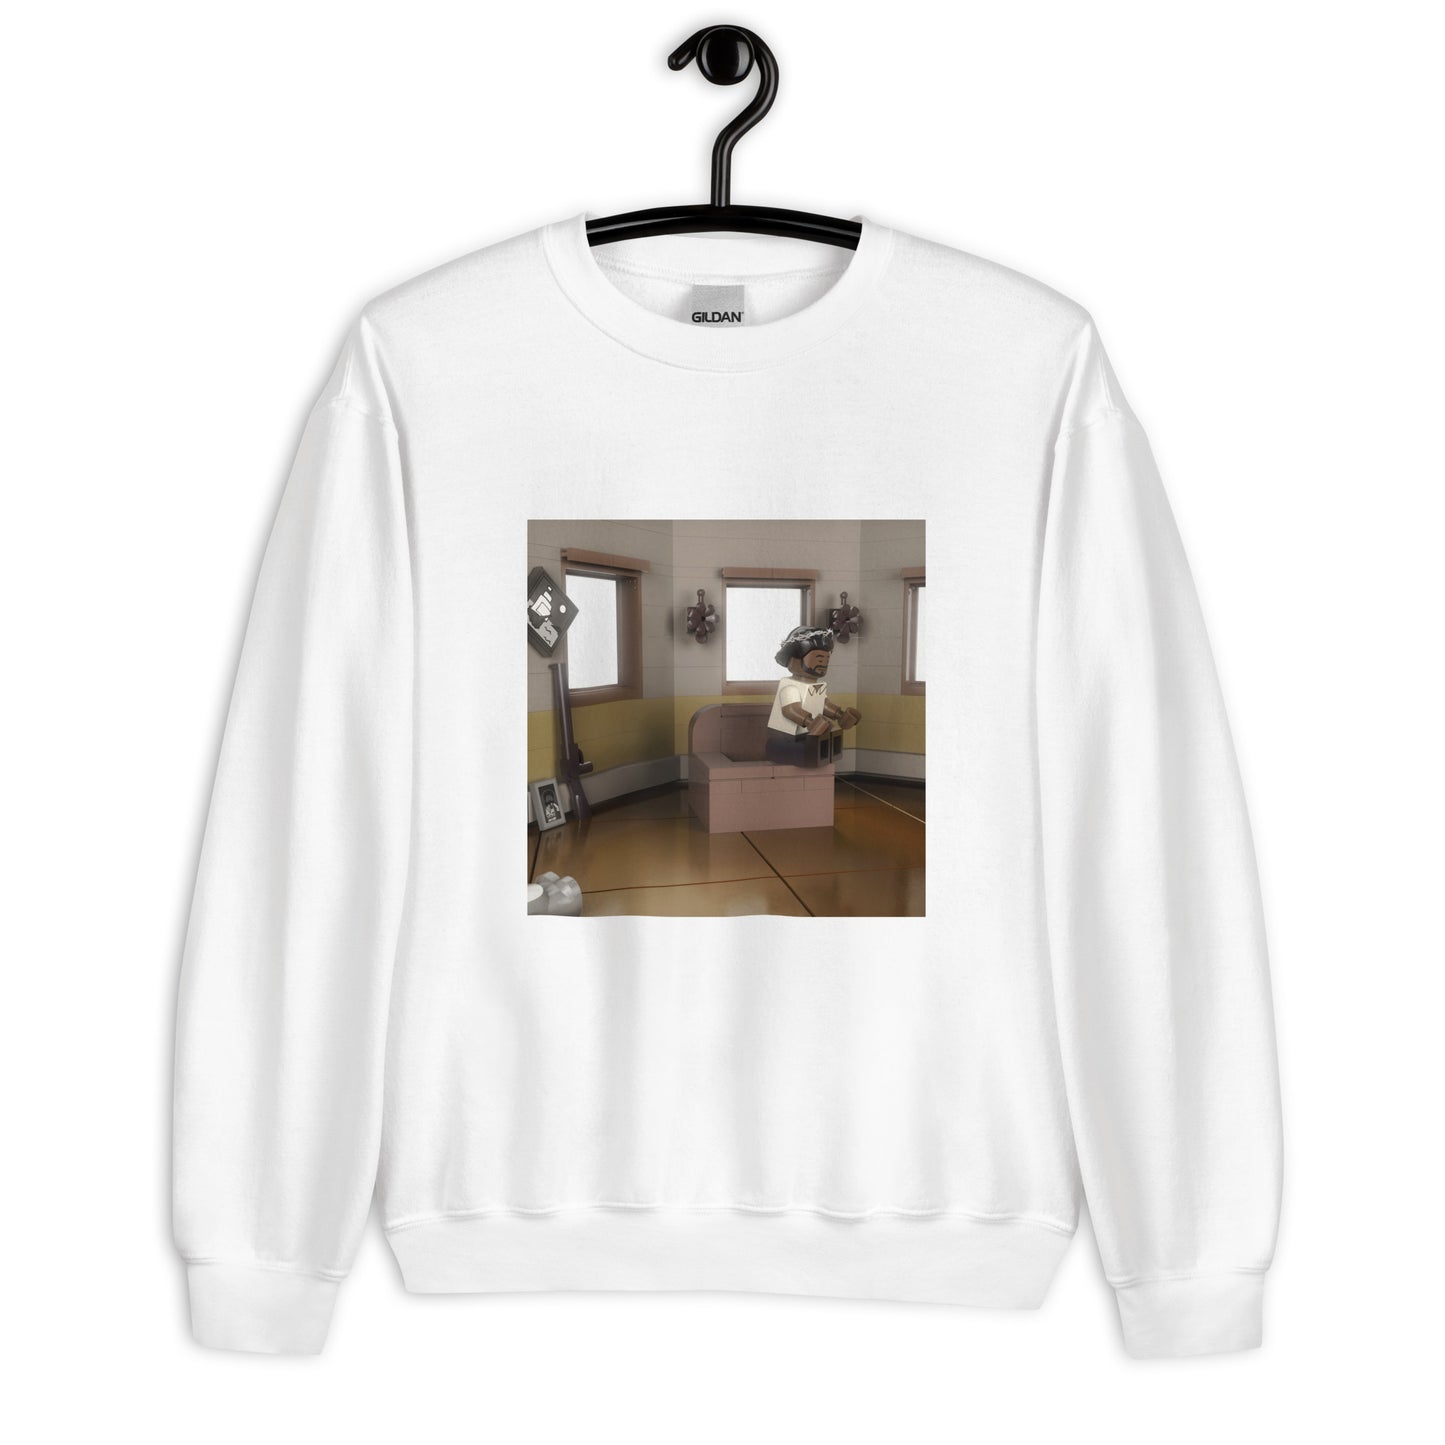 "Kendrick Lamar - Mr. Morale & the Big Steppers (Physical "Back" Cover)" Lego Parody Sweatshirt